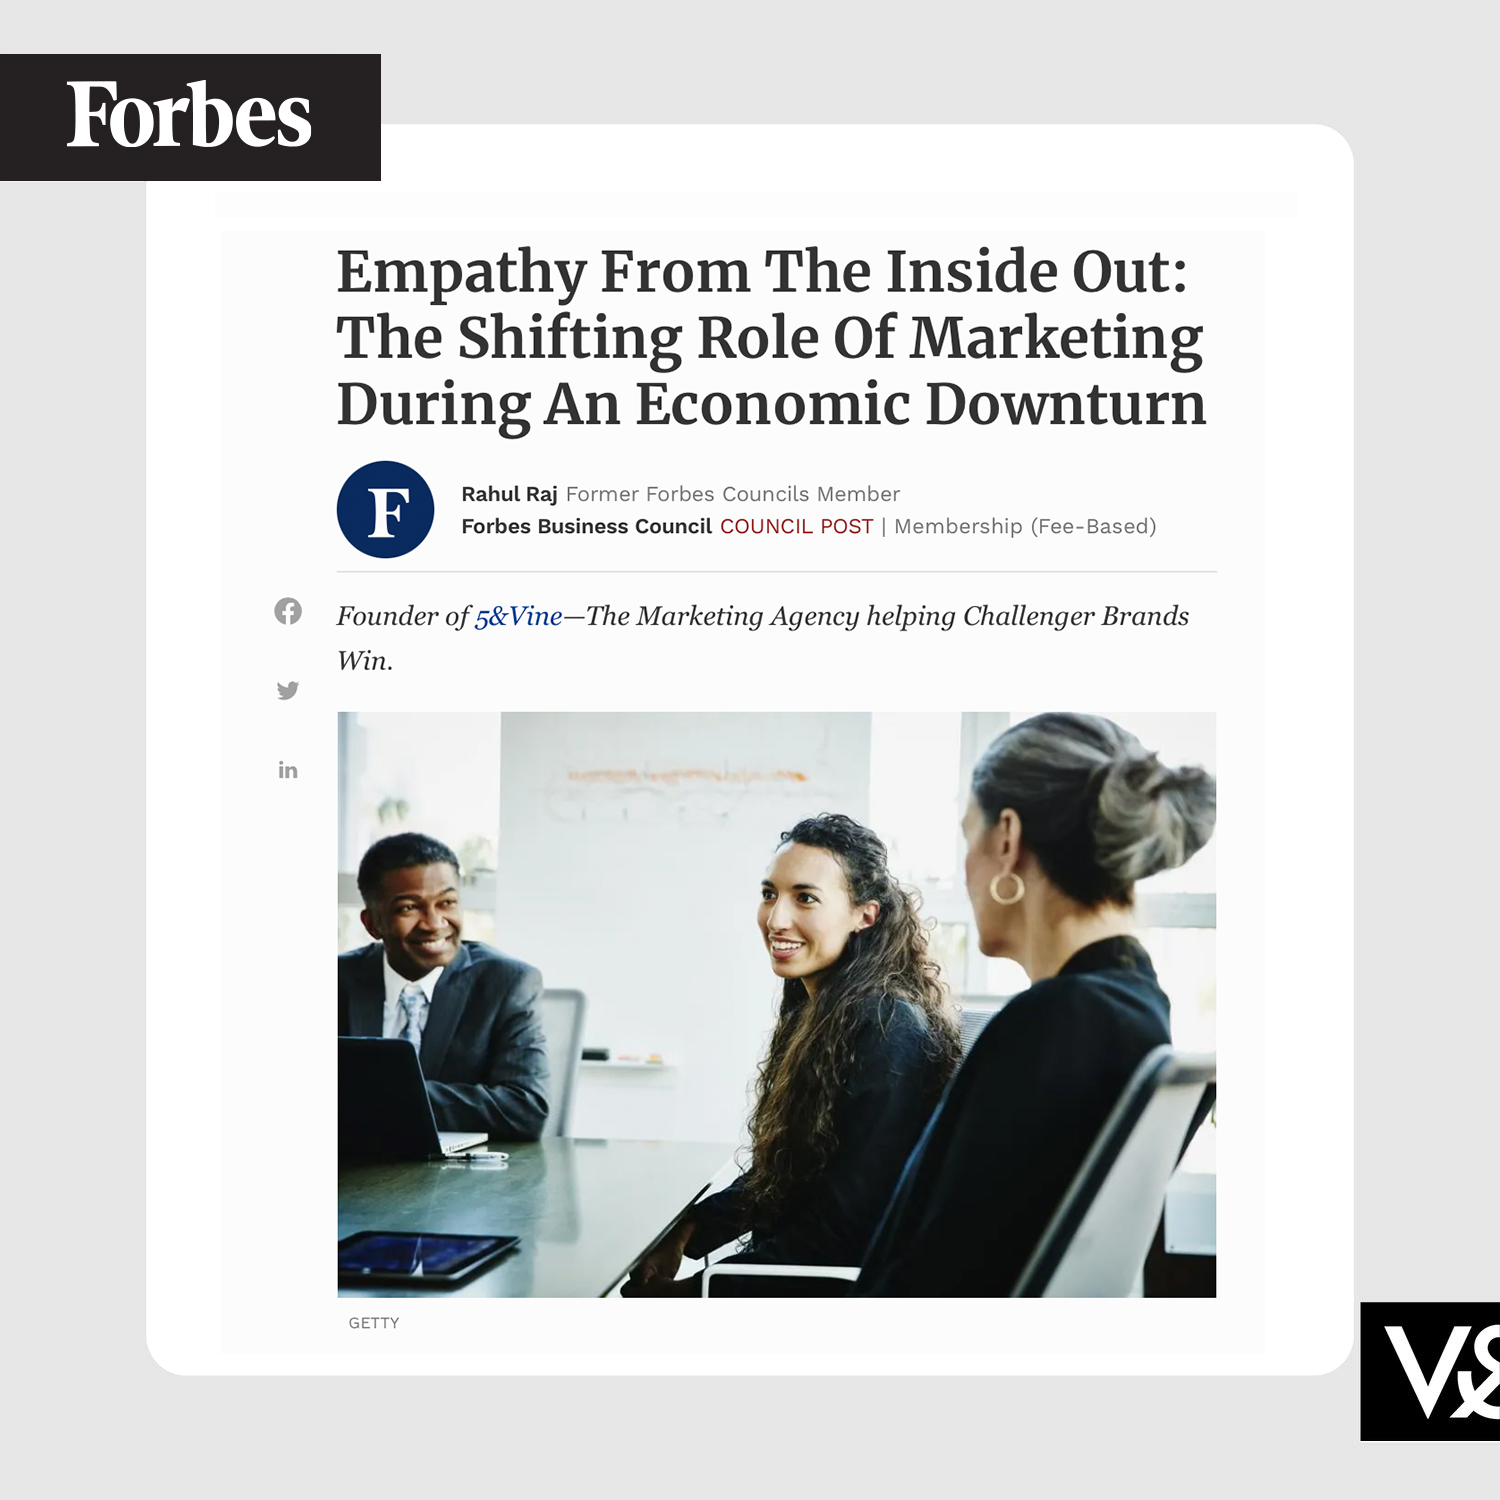 Forbes – Empathy From The Inside Out